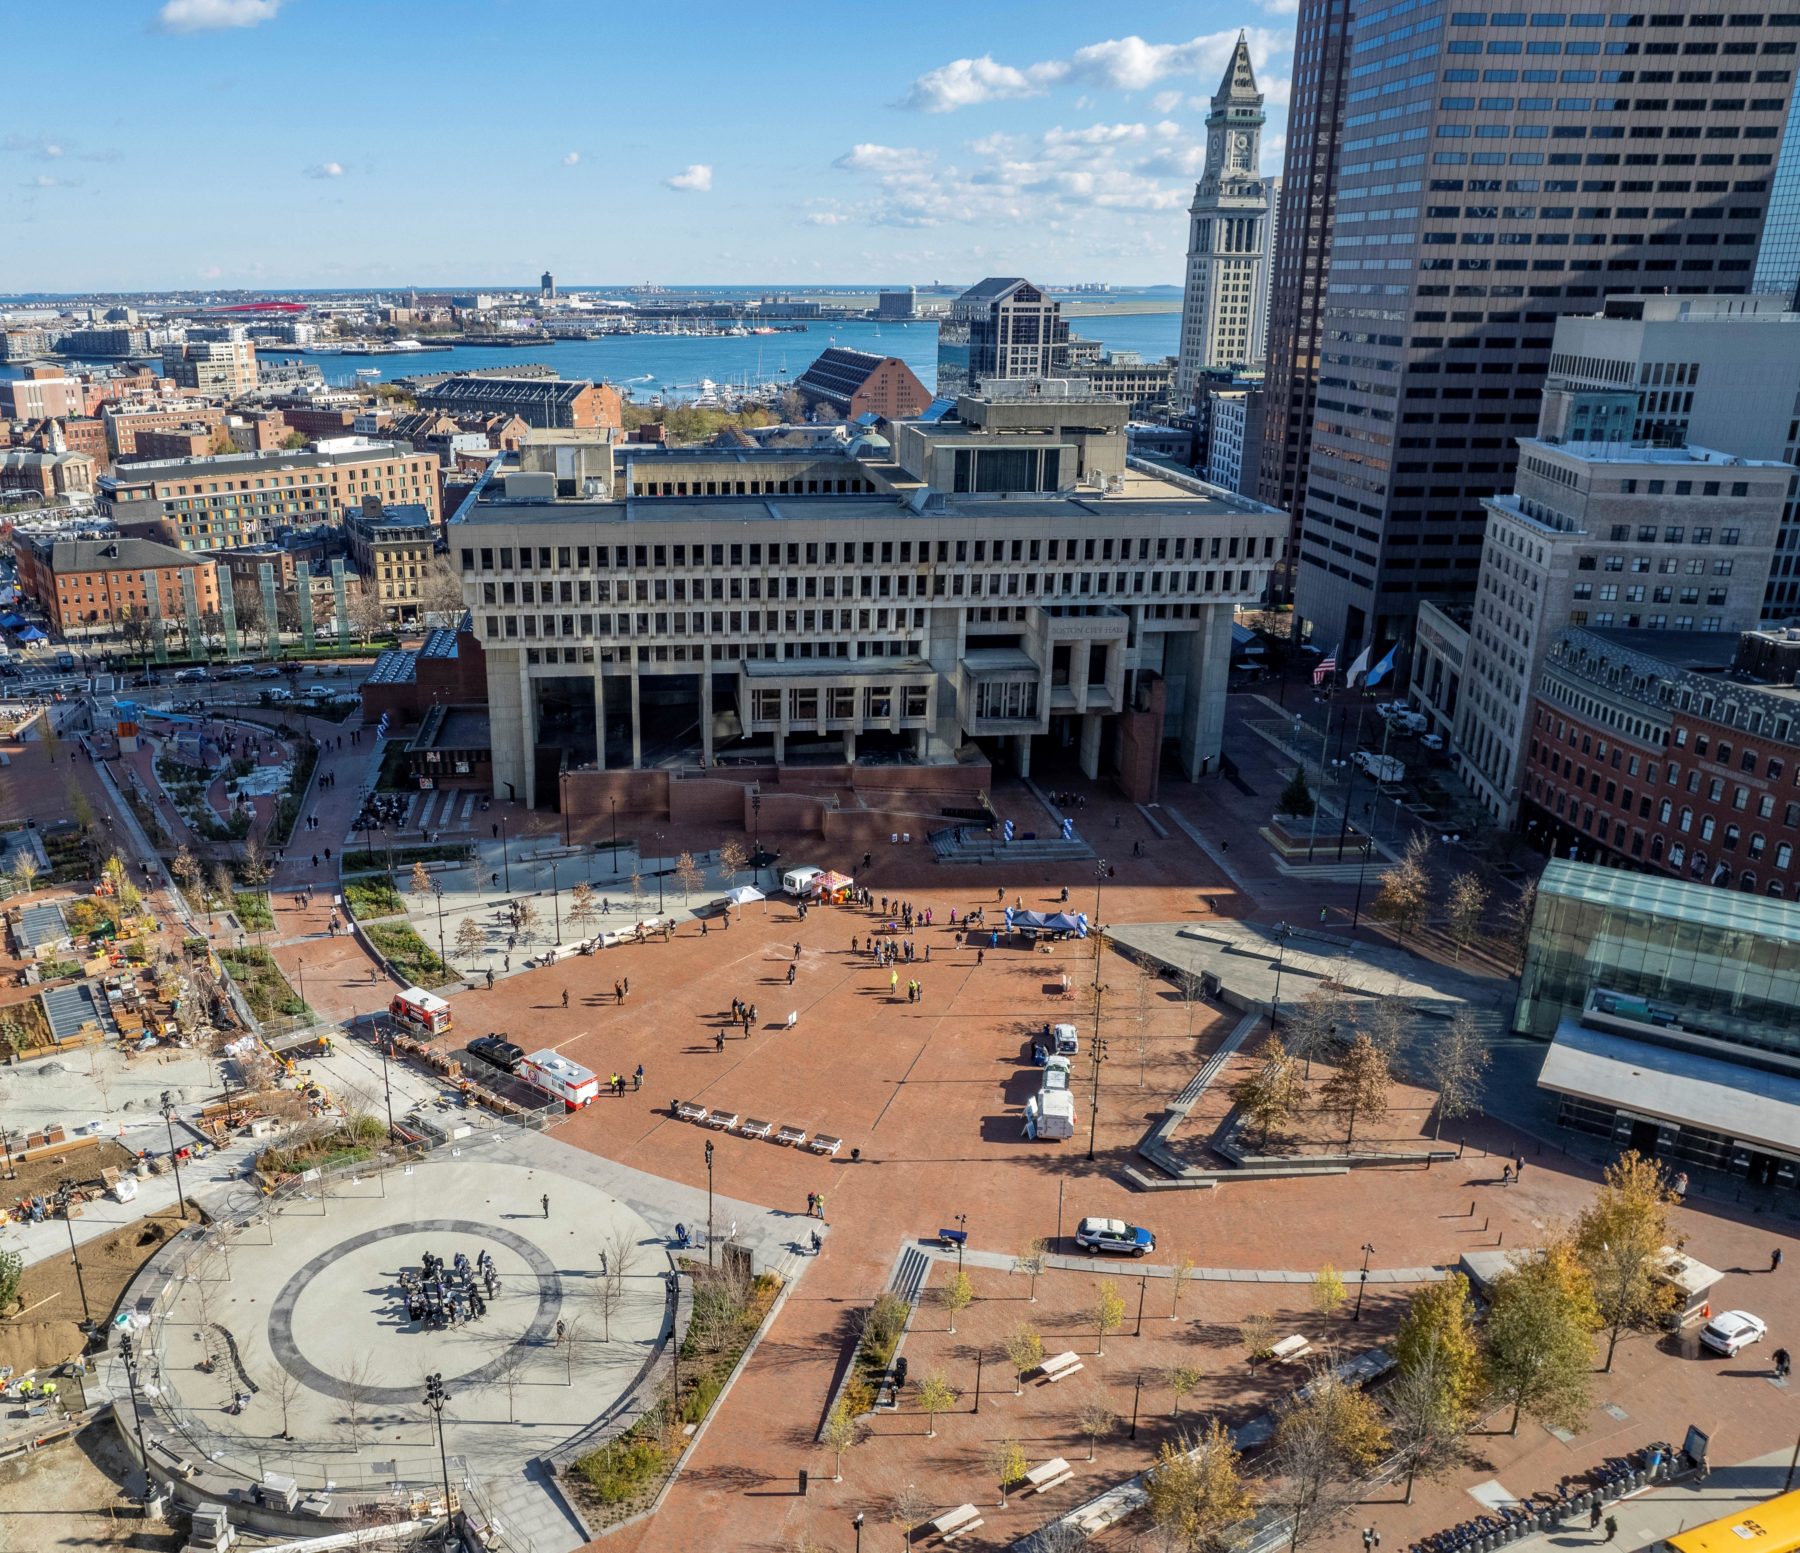 An aerial view of Boston City Hall Plaza